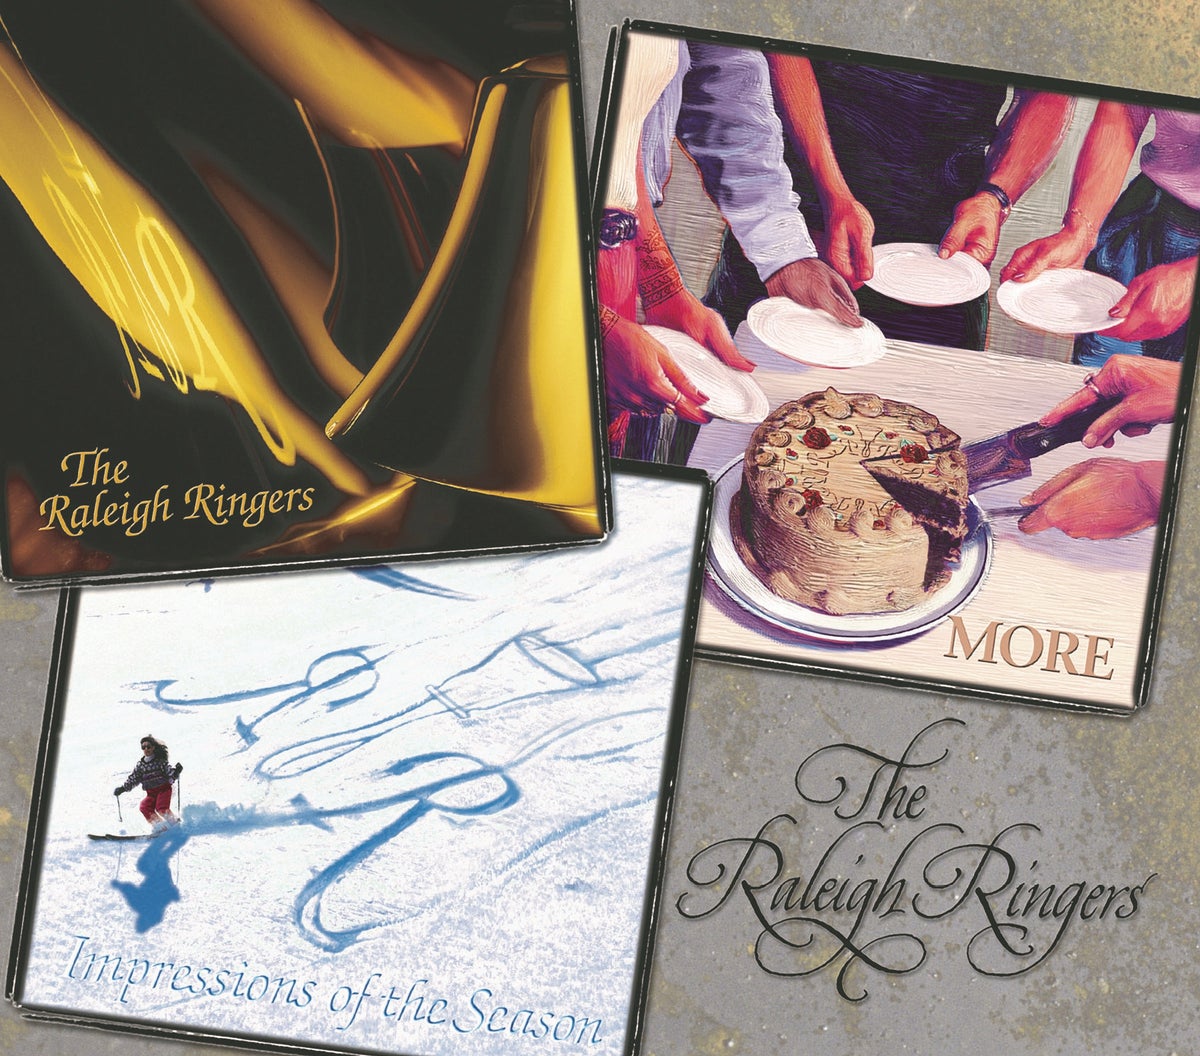 The Raleigh Ringers Box Set